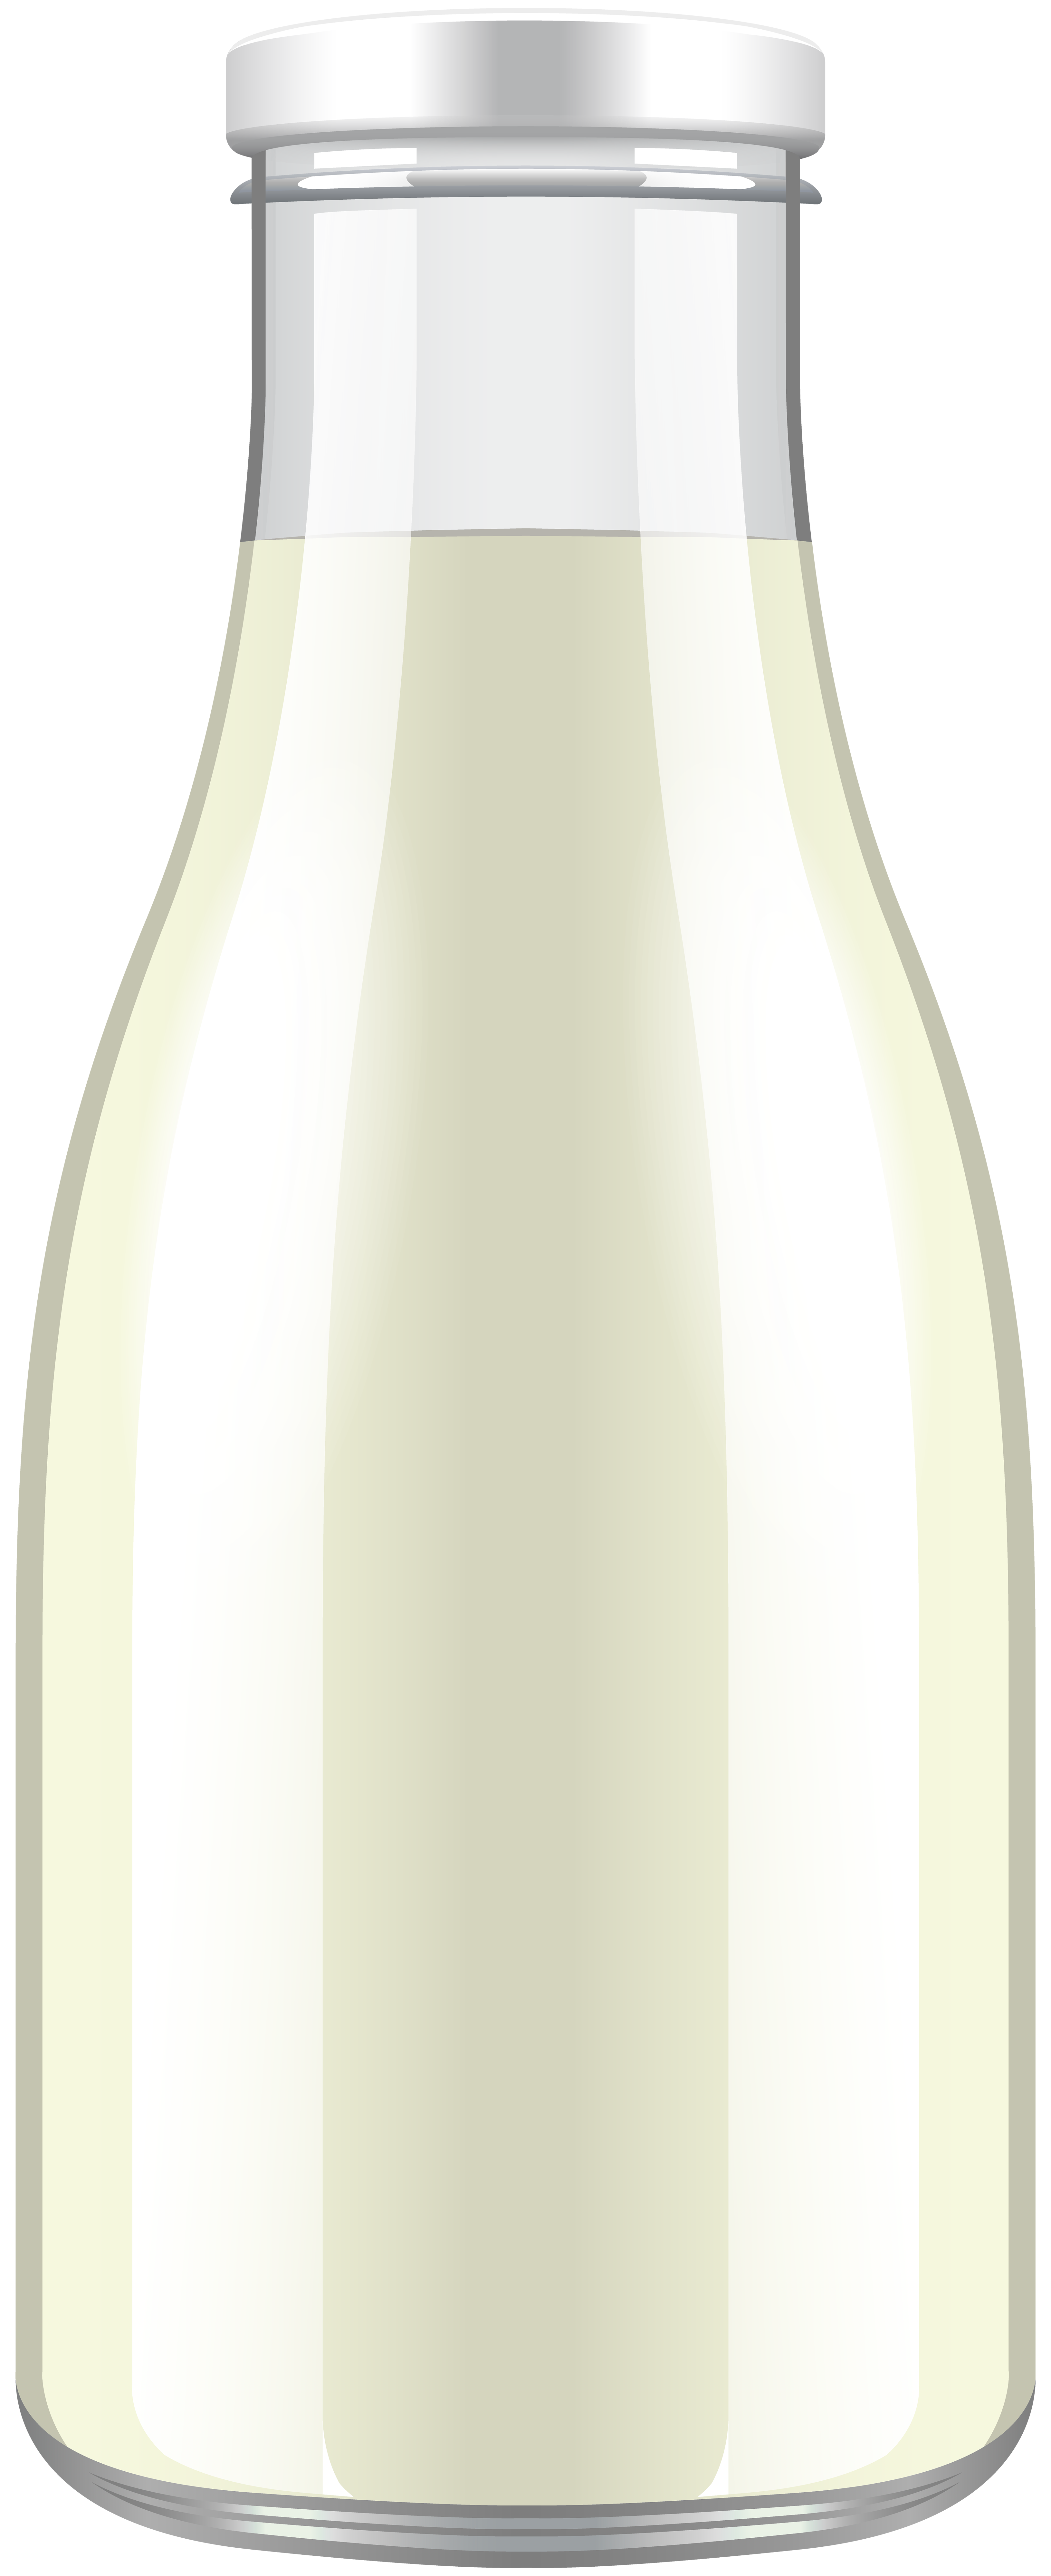 Bottle of Milk PNG Clip Art Image | Gallery Yopriceville - High-Quality